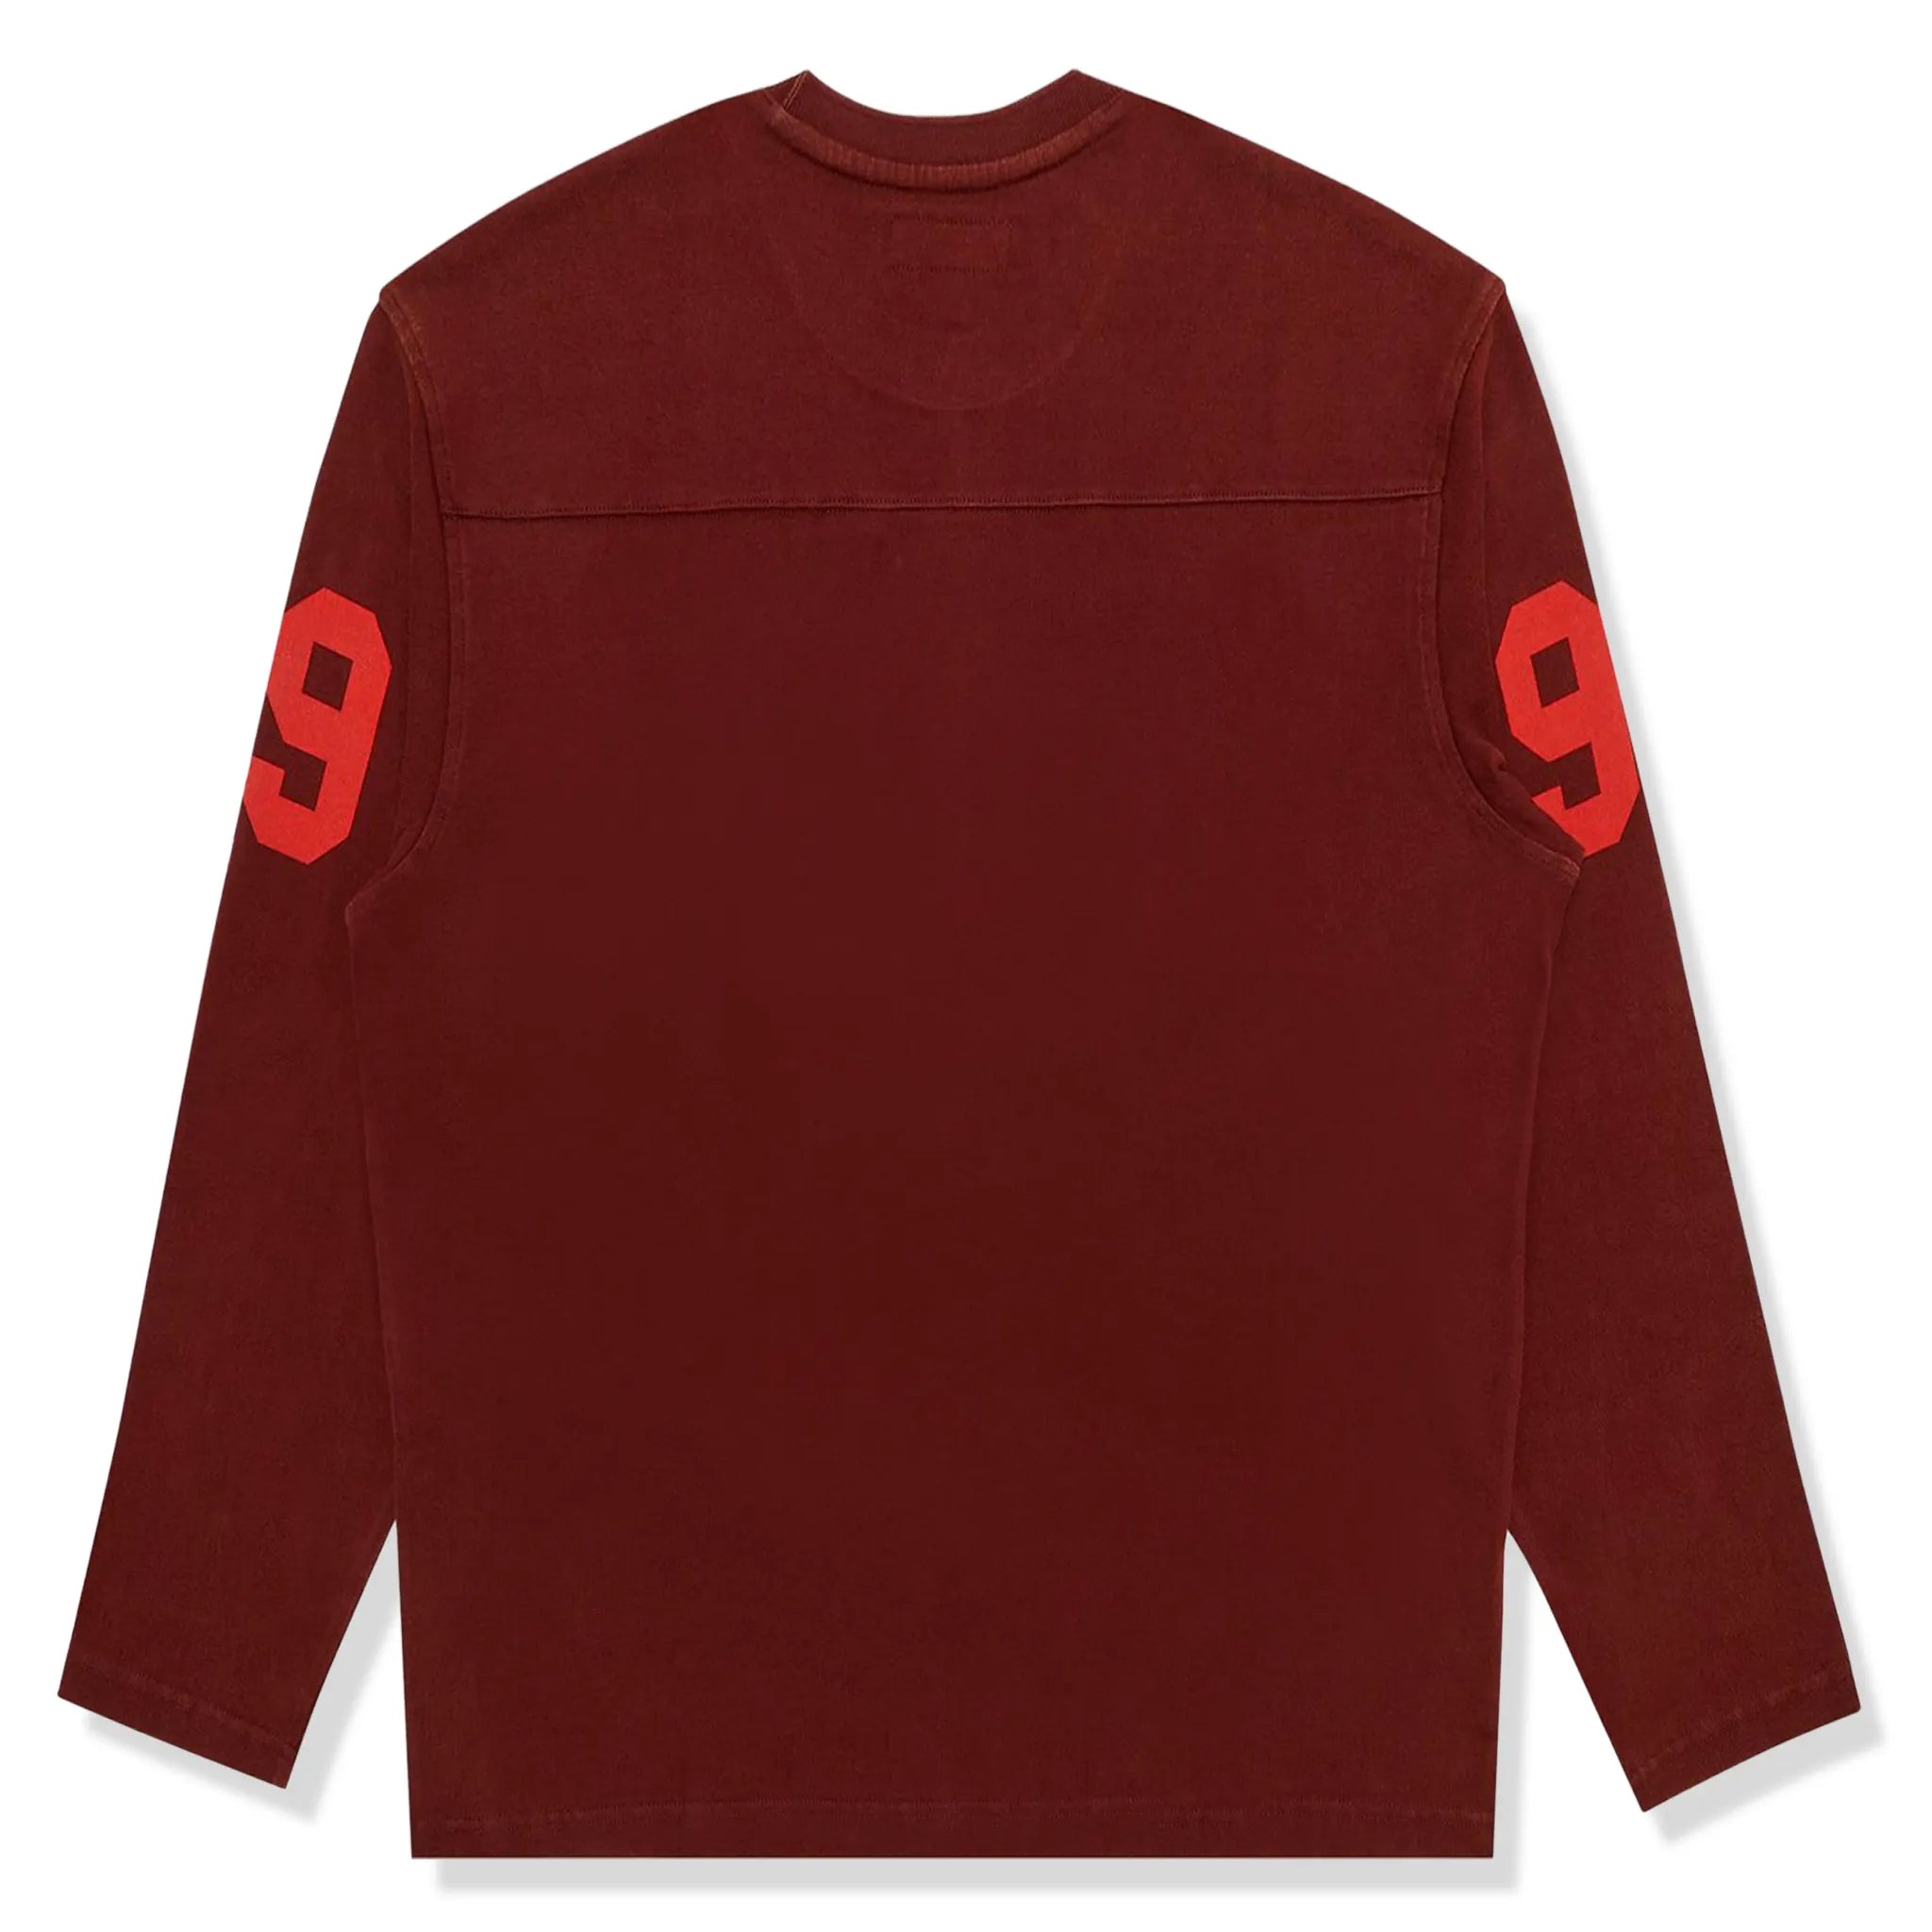 Back view of Supreme 99 L/S Maroon Football T Shirt